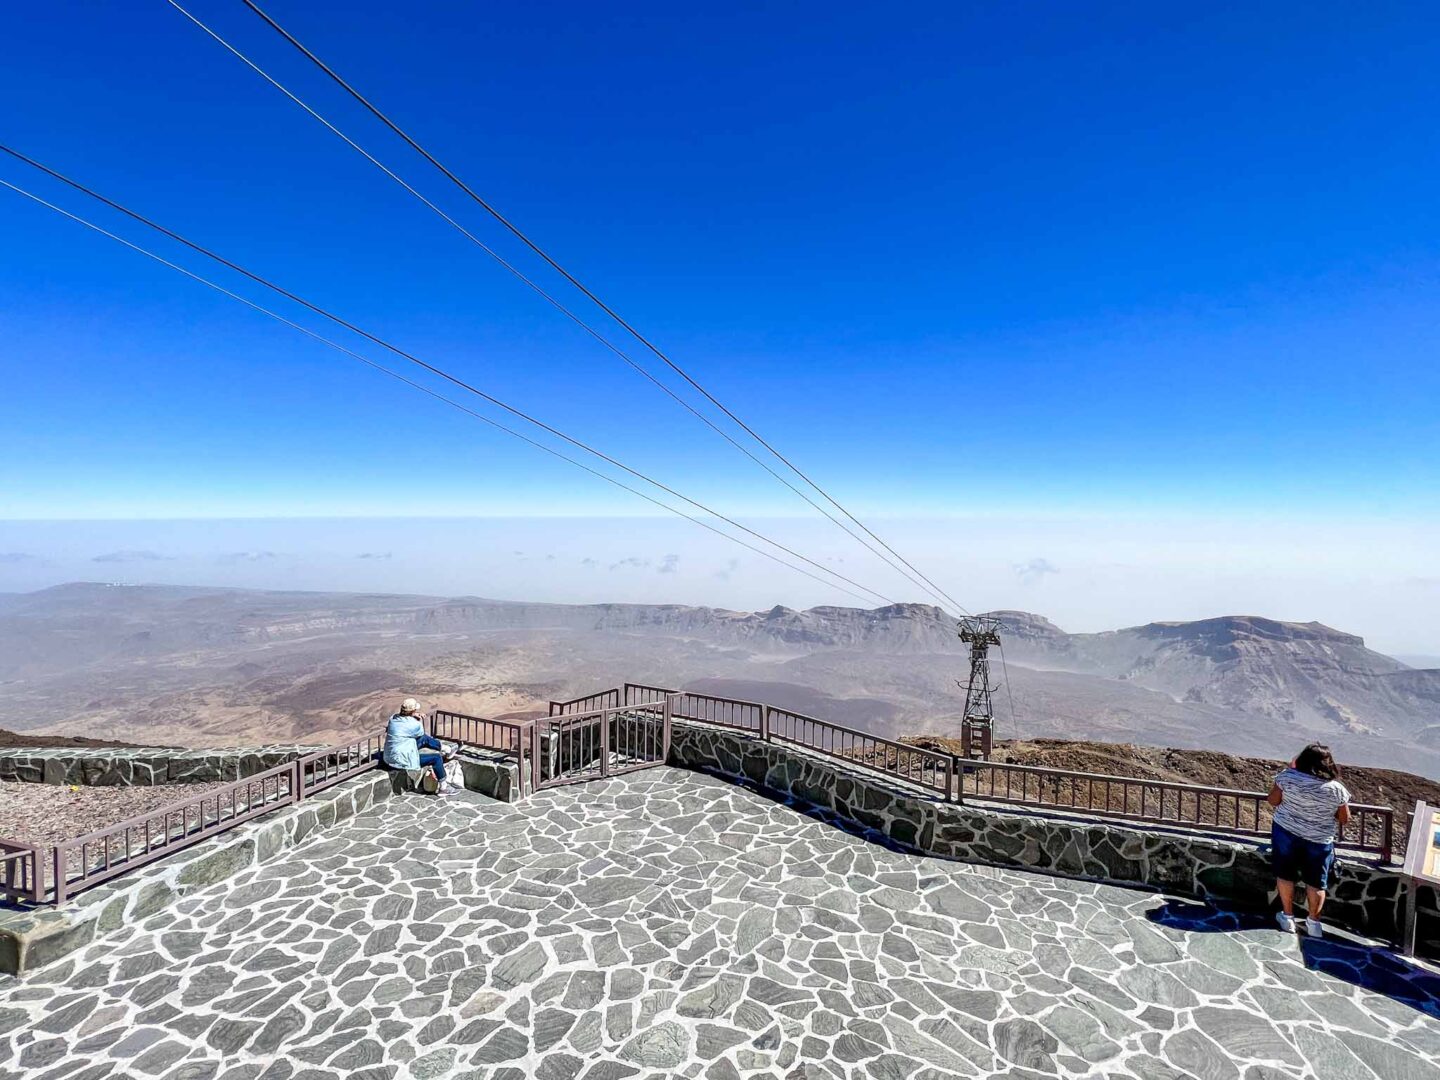 Tenerife road trip, Mount Teide Cable Car viewing platform at the top